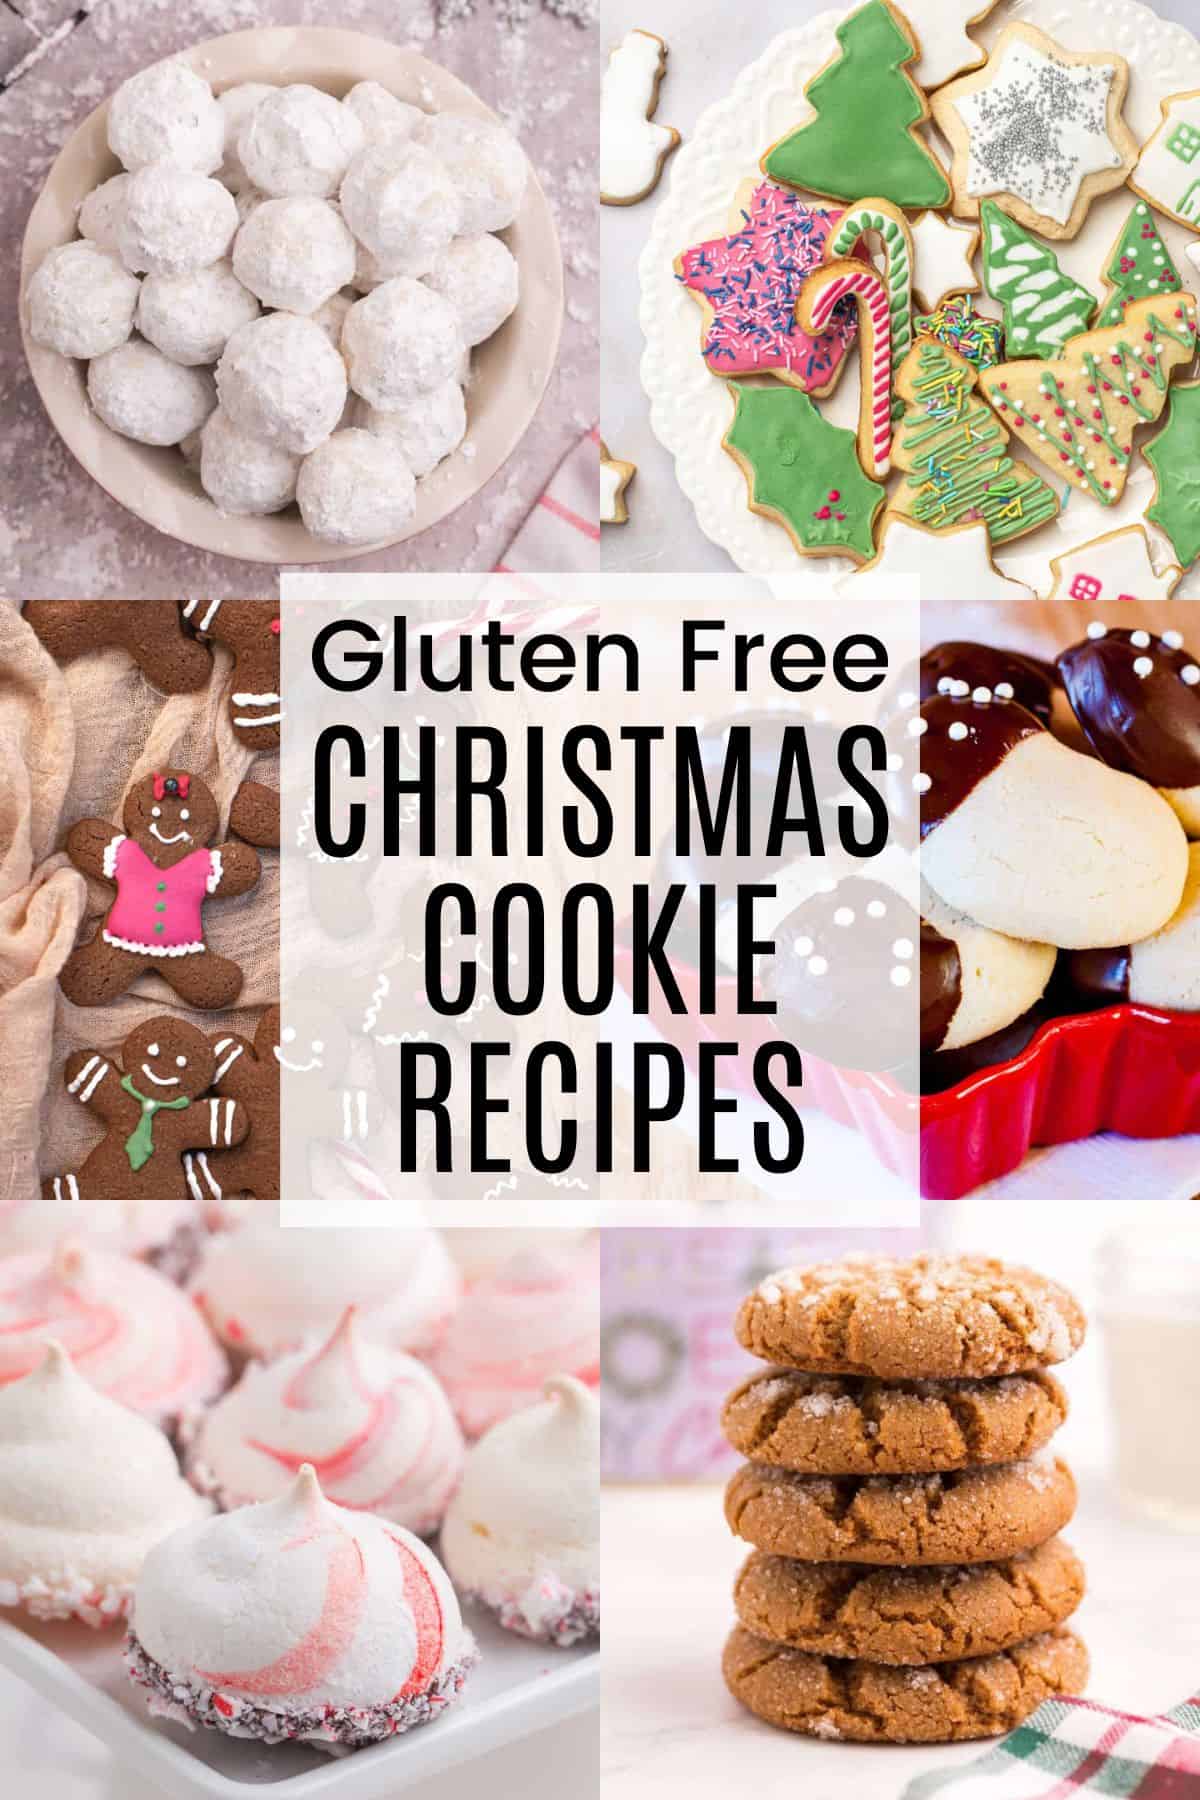 A two-by-three collage of photos of red velvet cookies, gingersnaps, peppermint meringues, snowball cookies, decorated cut-out sugar cookies, and more with a white box in the middle with text overlay that says "Gluten Free Christmas Cookie Recipes".